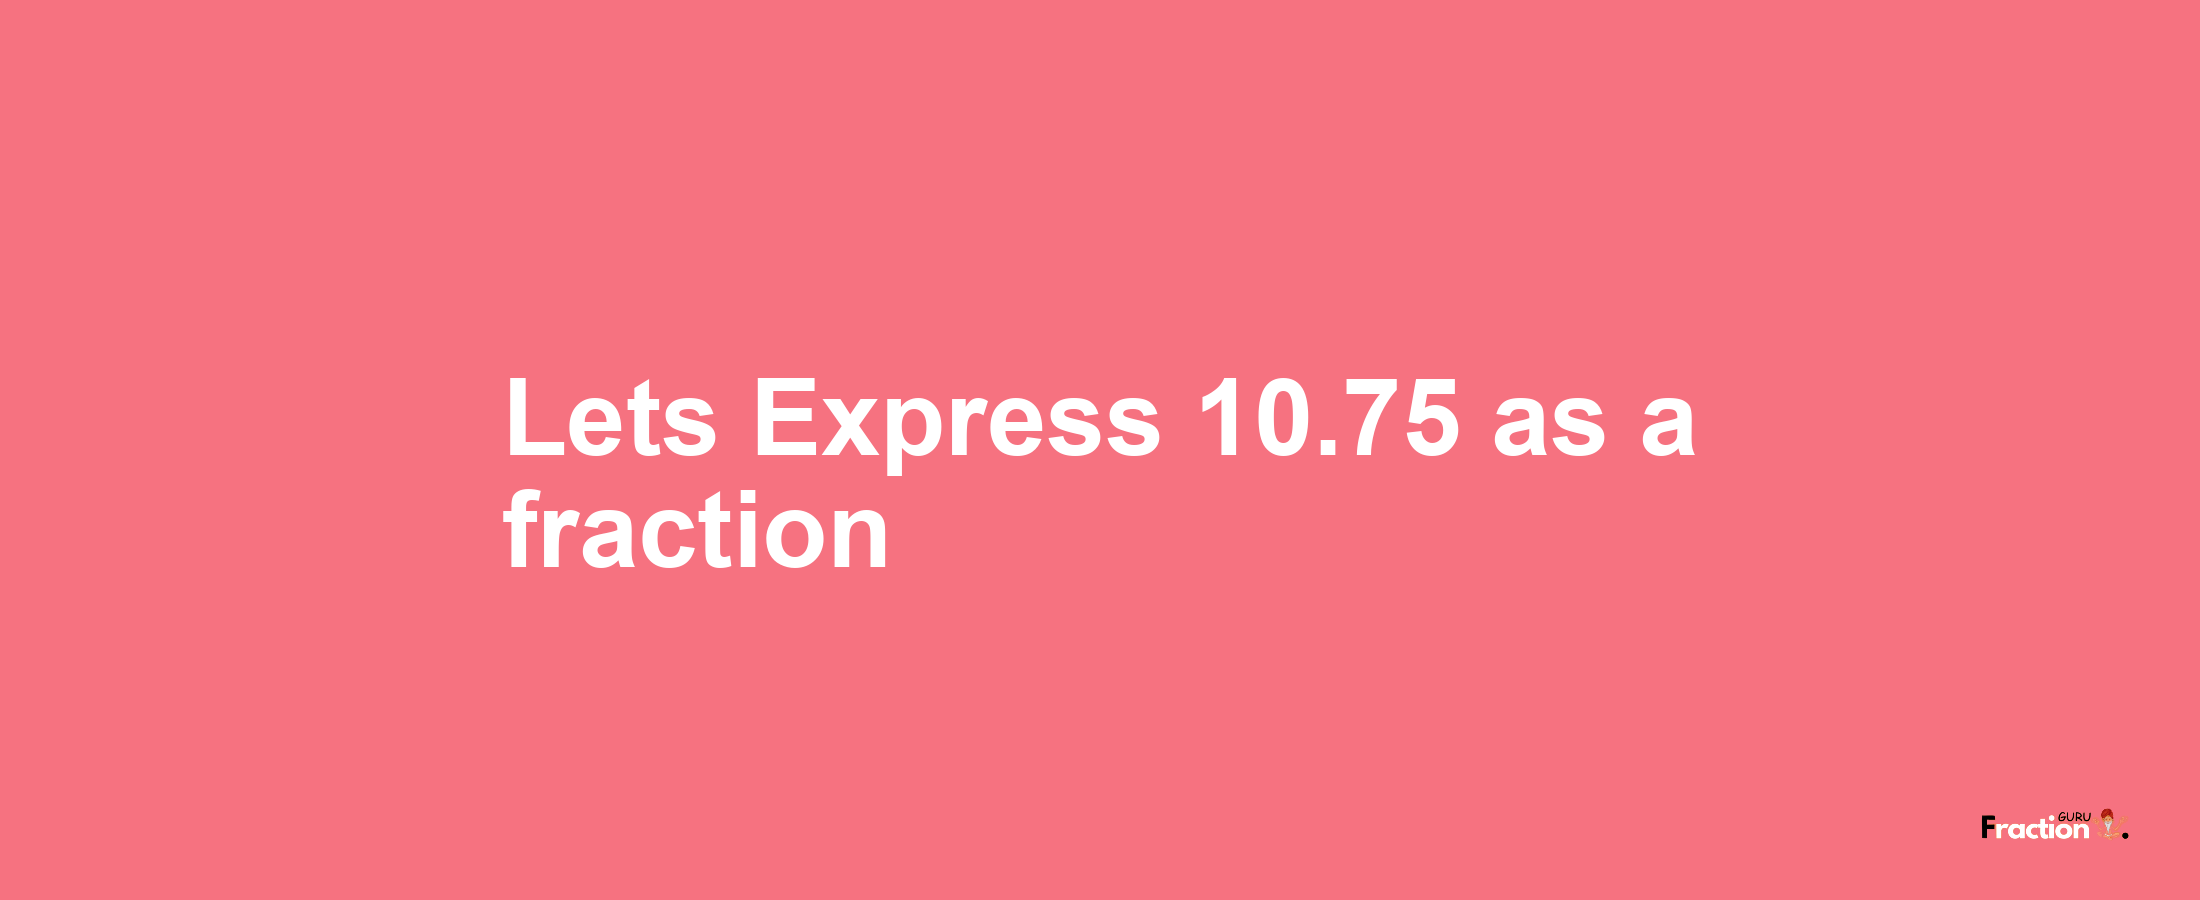 Lets Express 10.75 as afraction